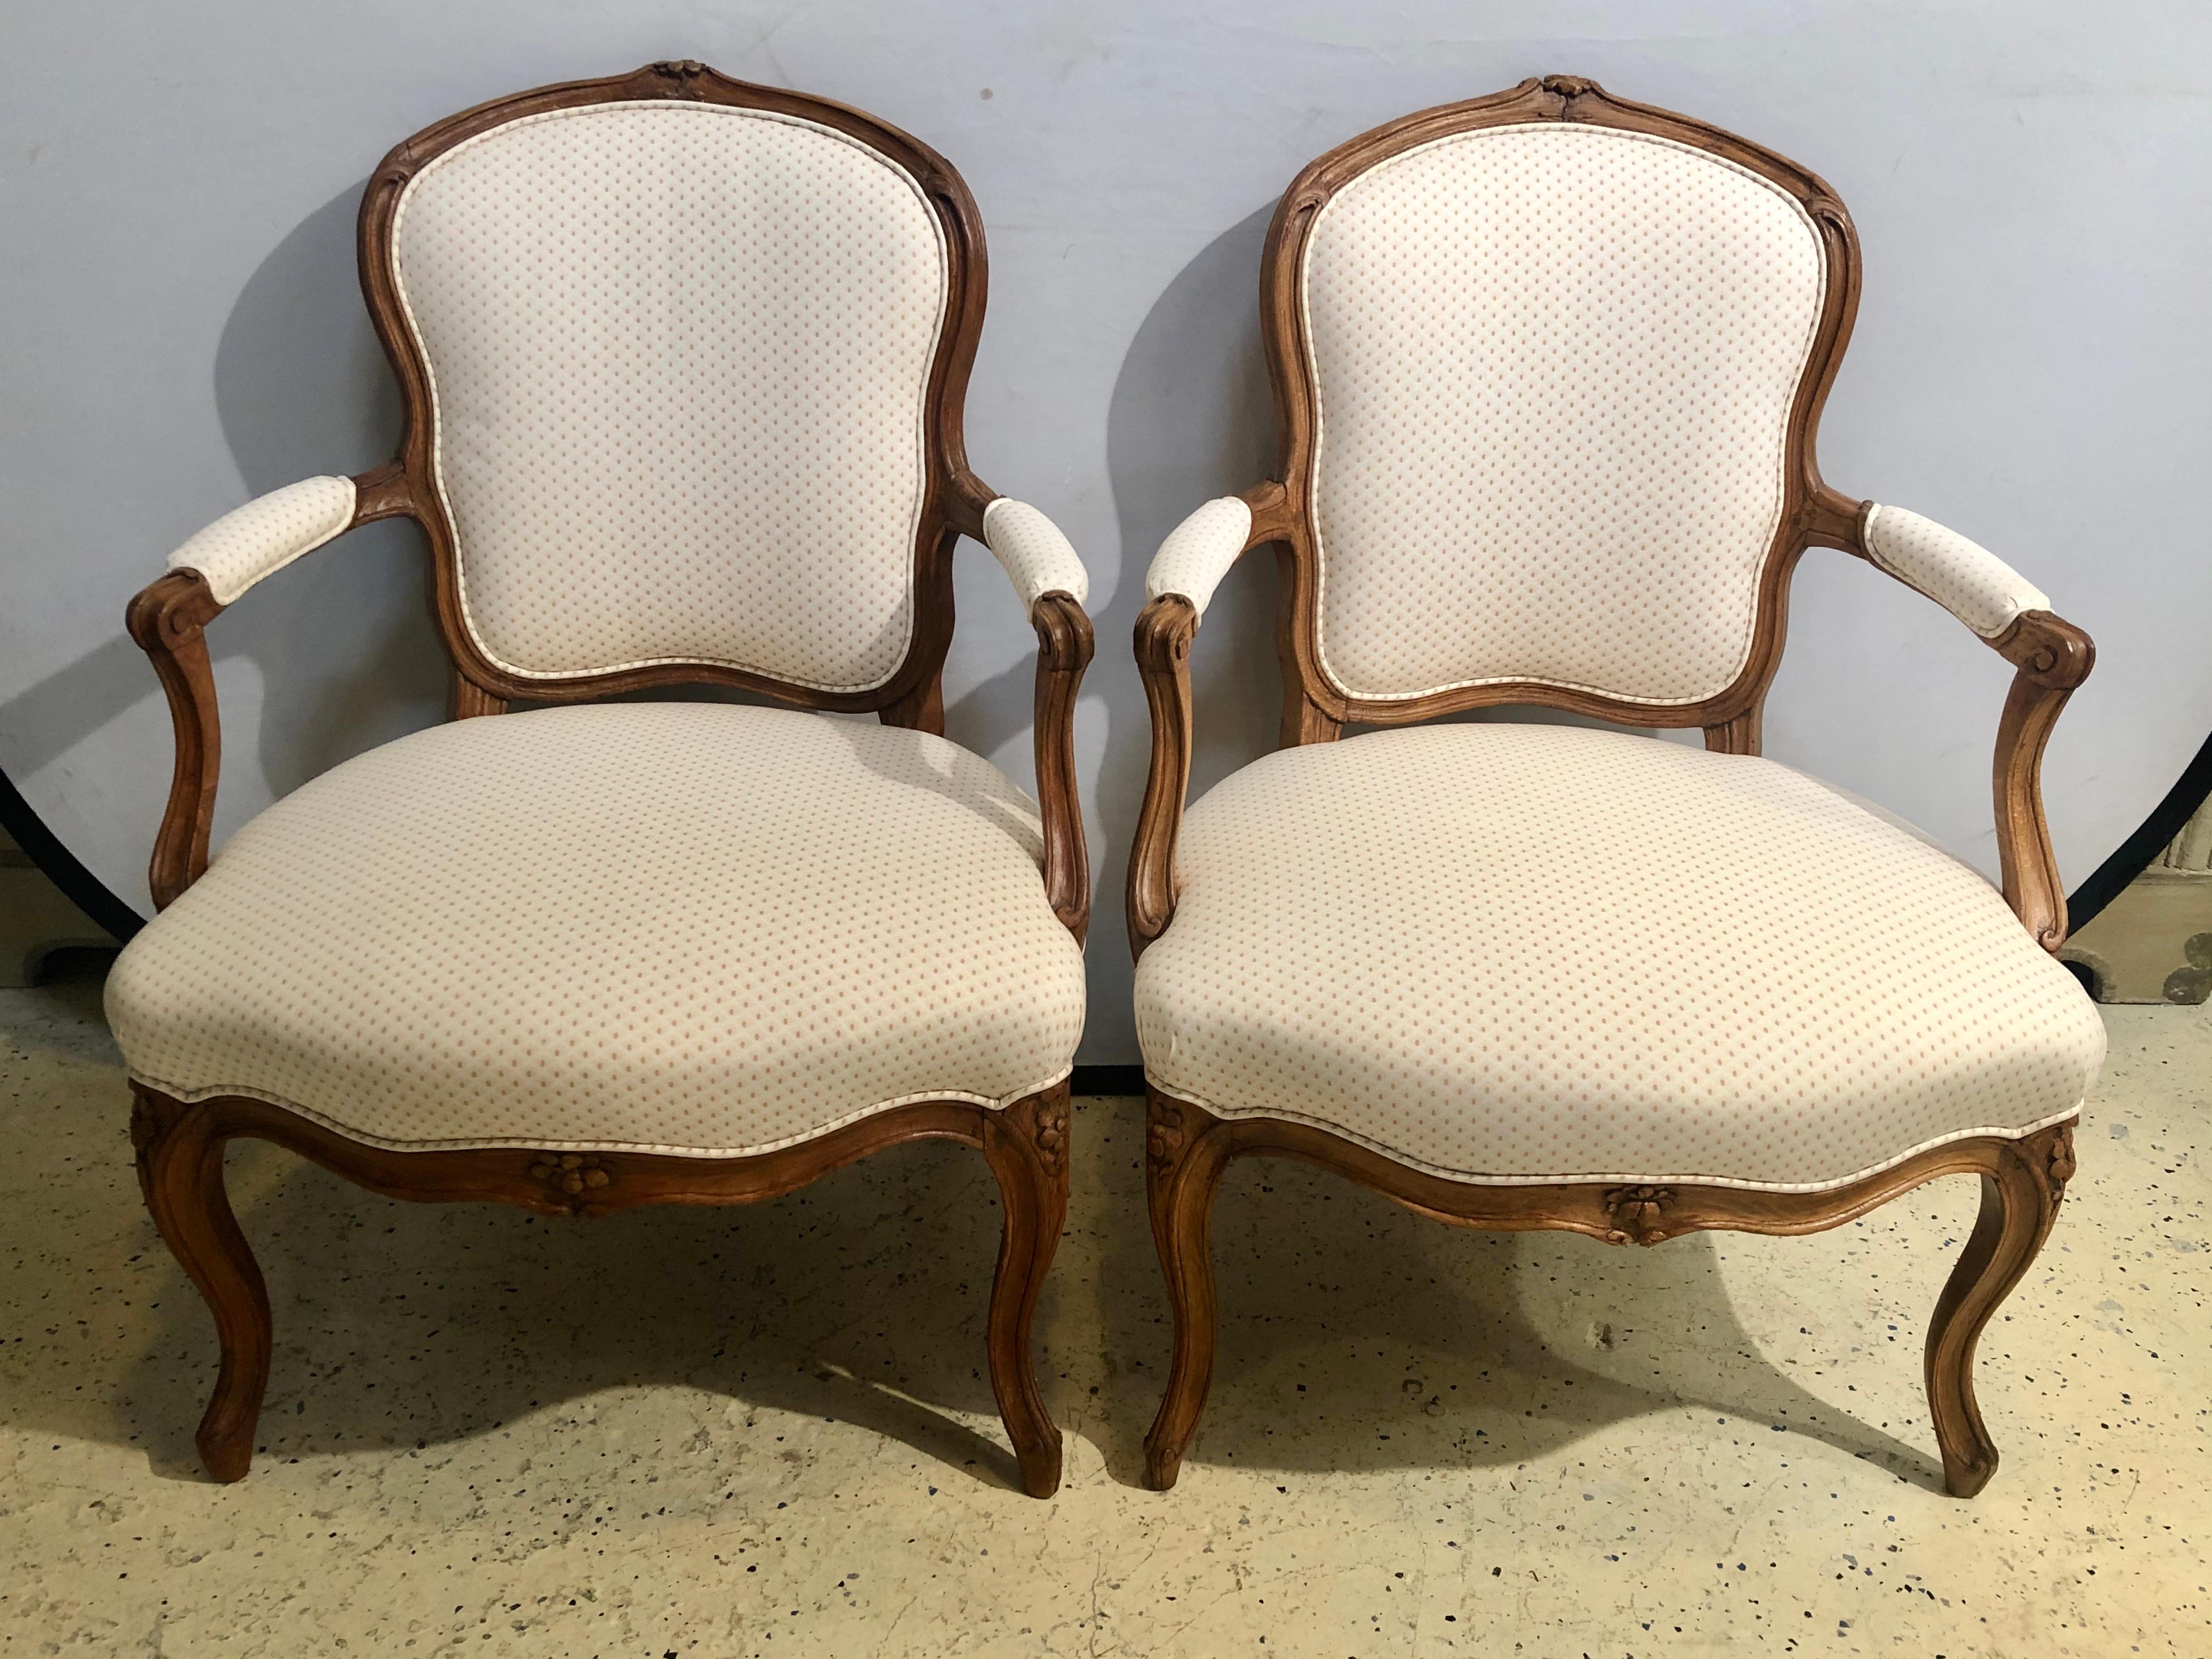 French 18th Century Pair of Beechwood Fauteuils or Armchairs with Provenance